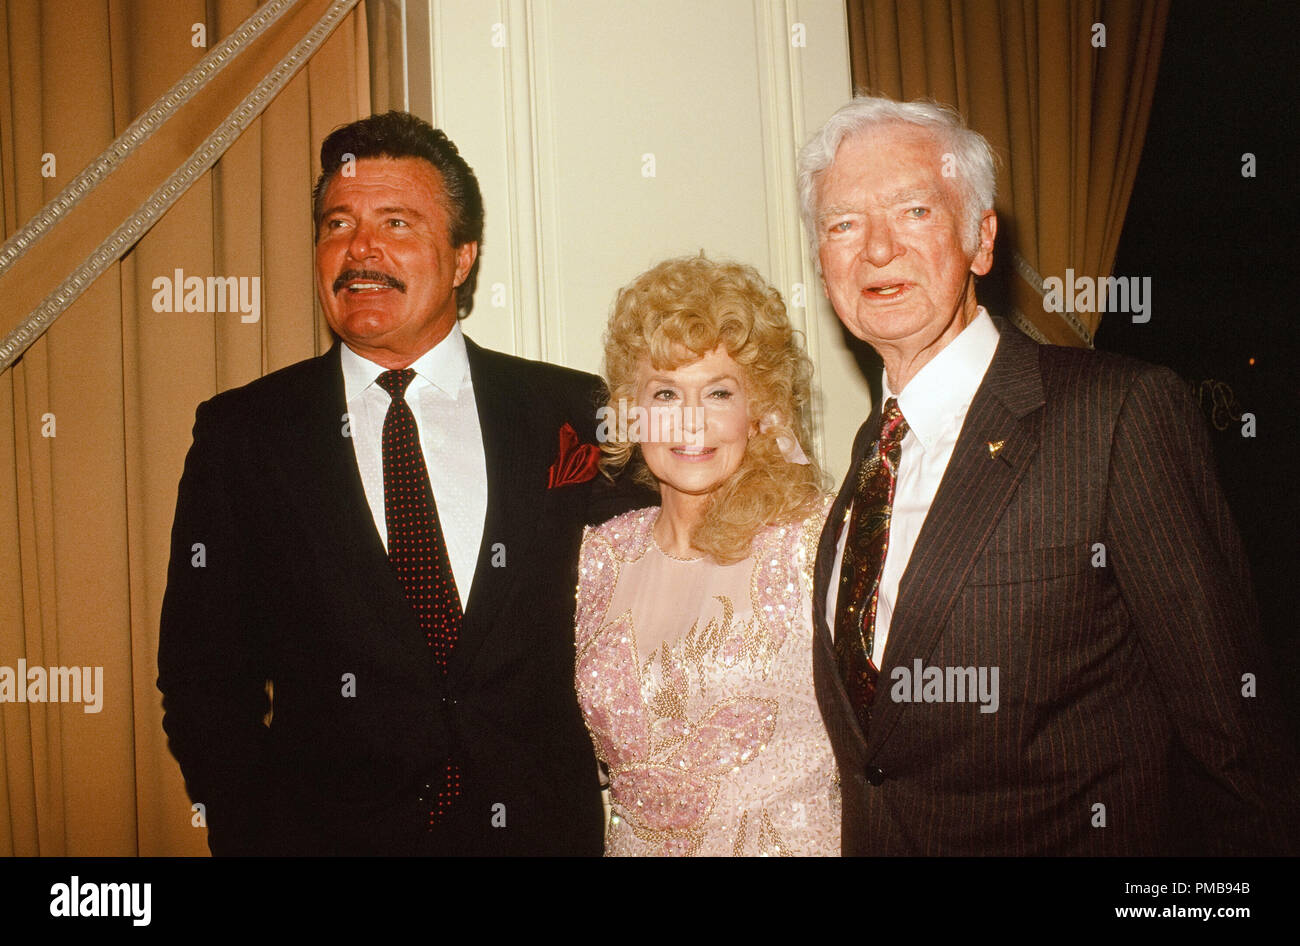 Max Baer Jr., Donna Douglas and Buddy Ebsen, March 20, 1992 File Reference # 32557 468THA Stock Photo